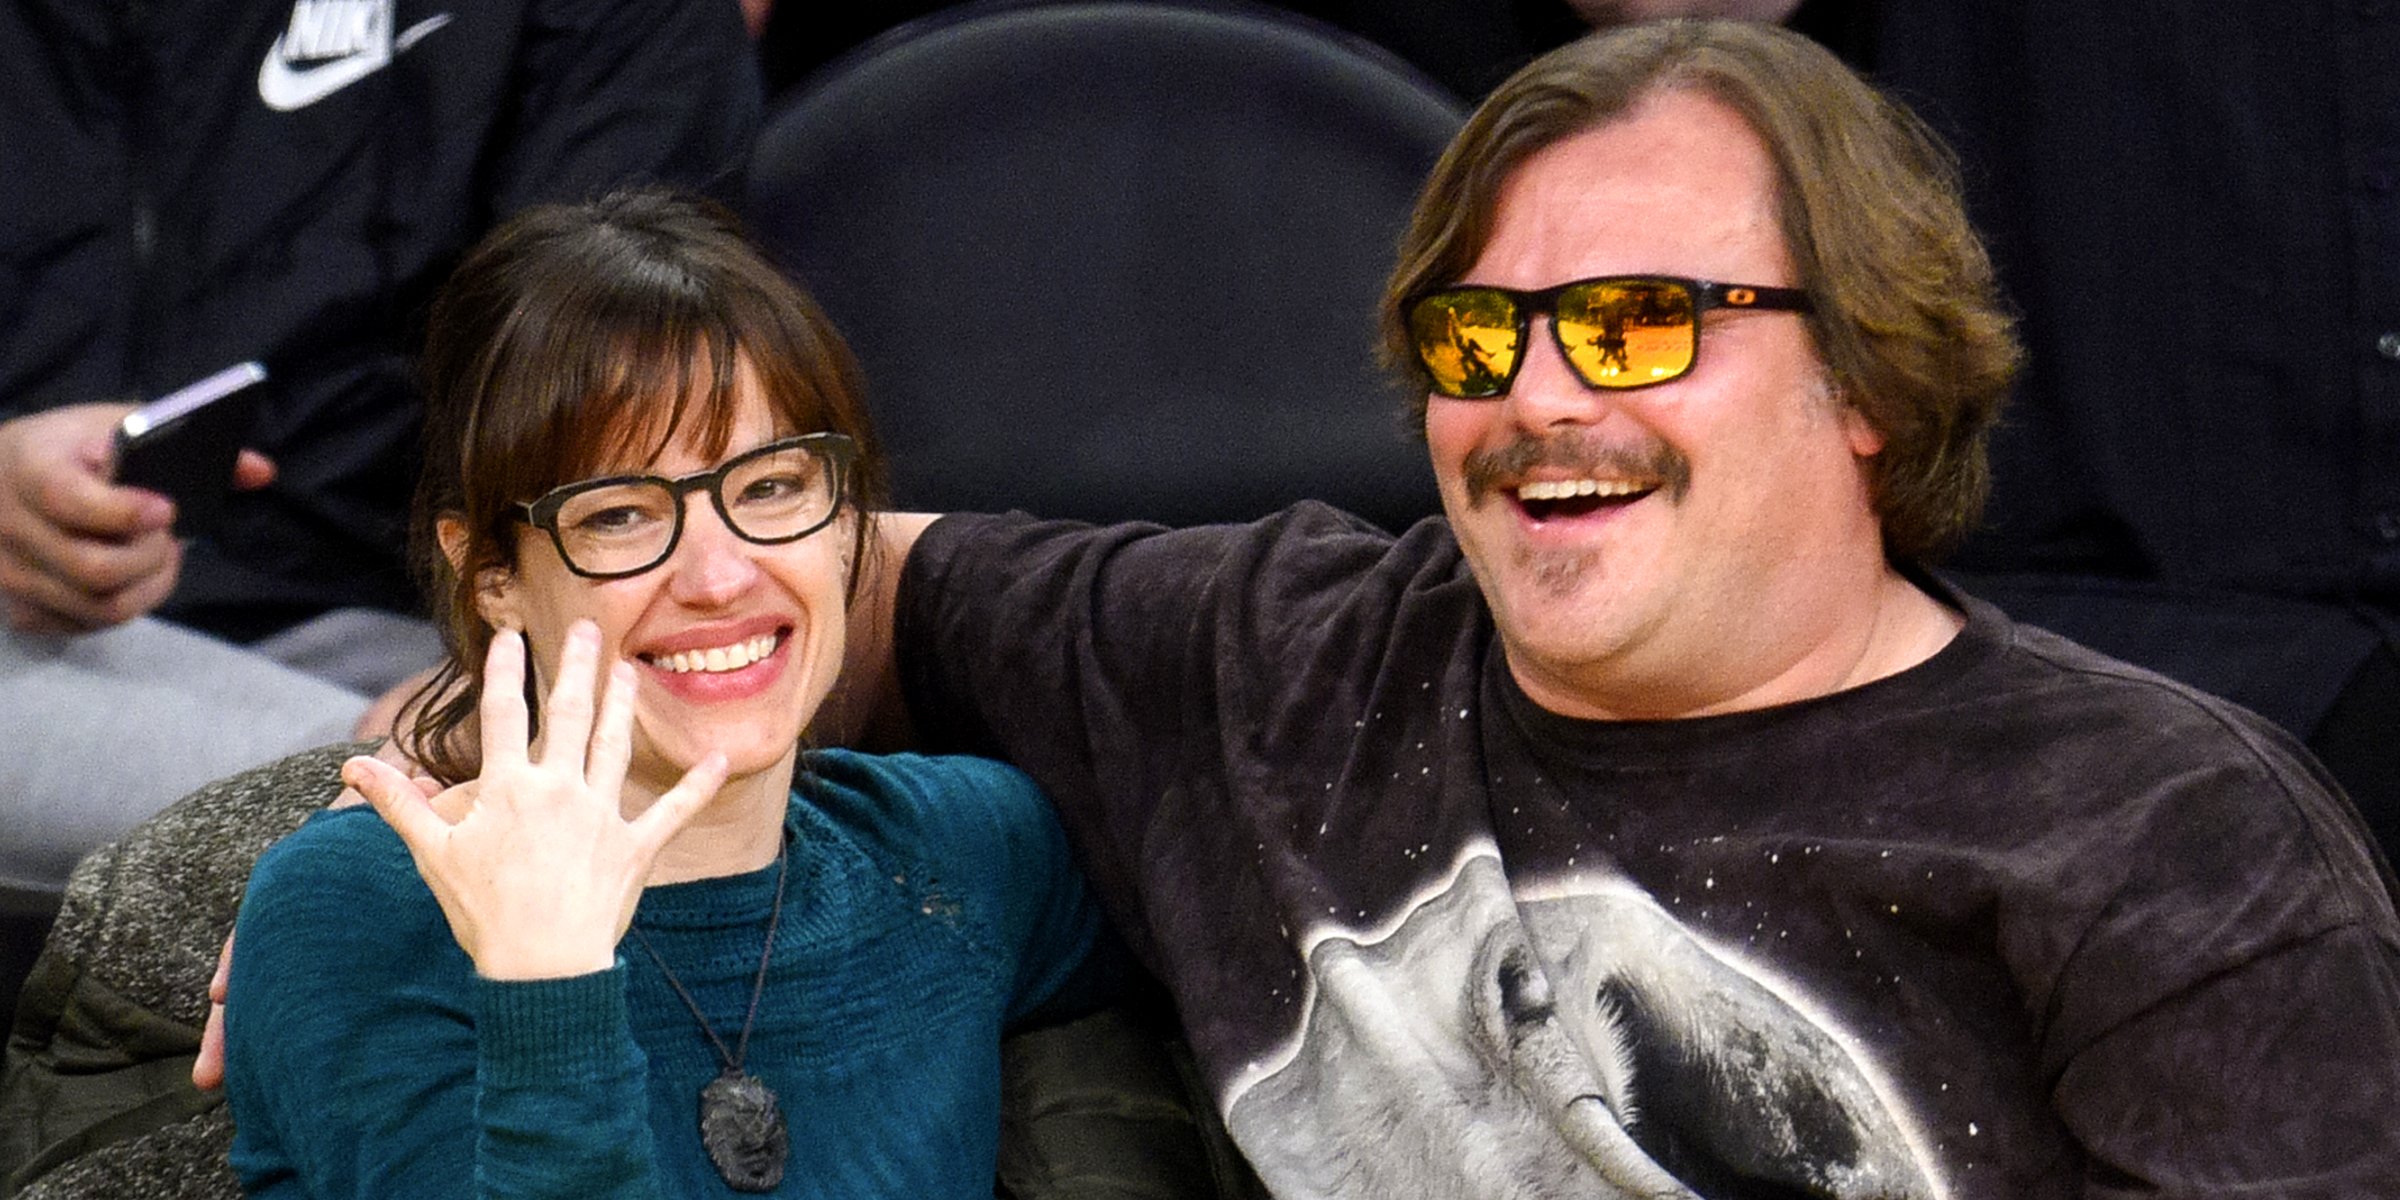 Tanya Haden and Jack Black at a Los Angeles Lakers basketball game against New Orleans Pelicans at Staples Center on January 12, 2016, in Los Angeles, California. | Source: Getty Images